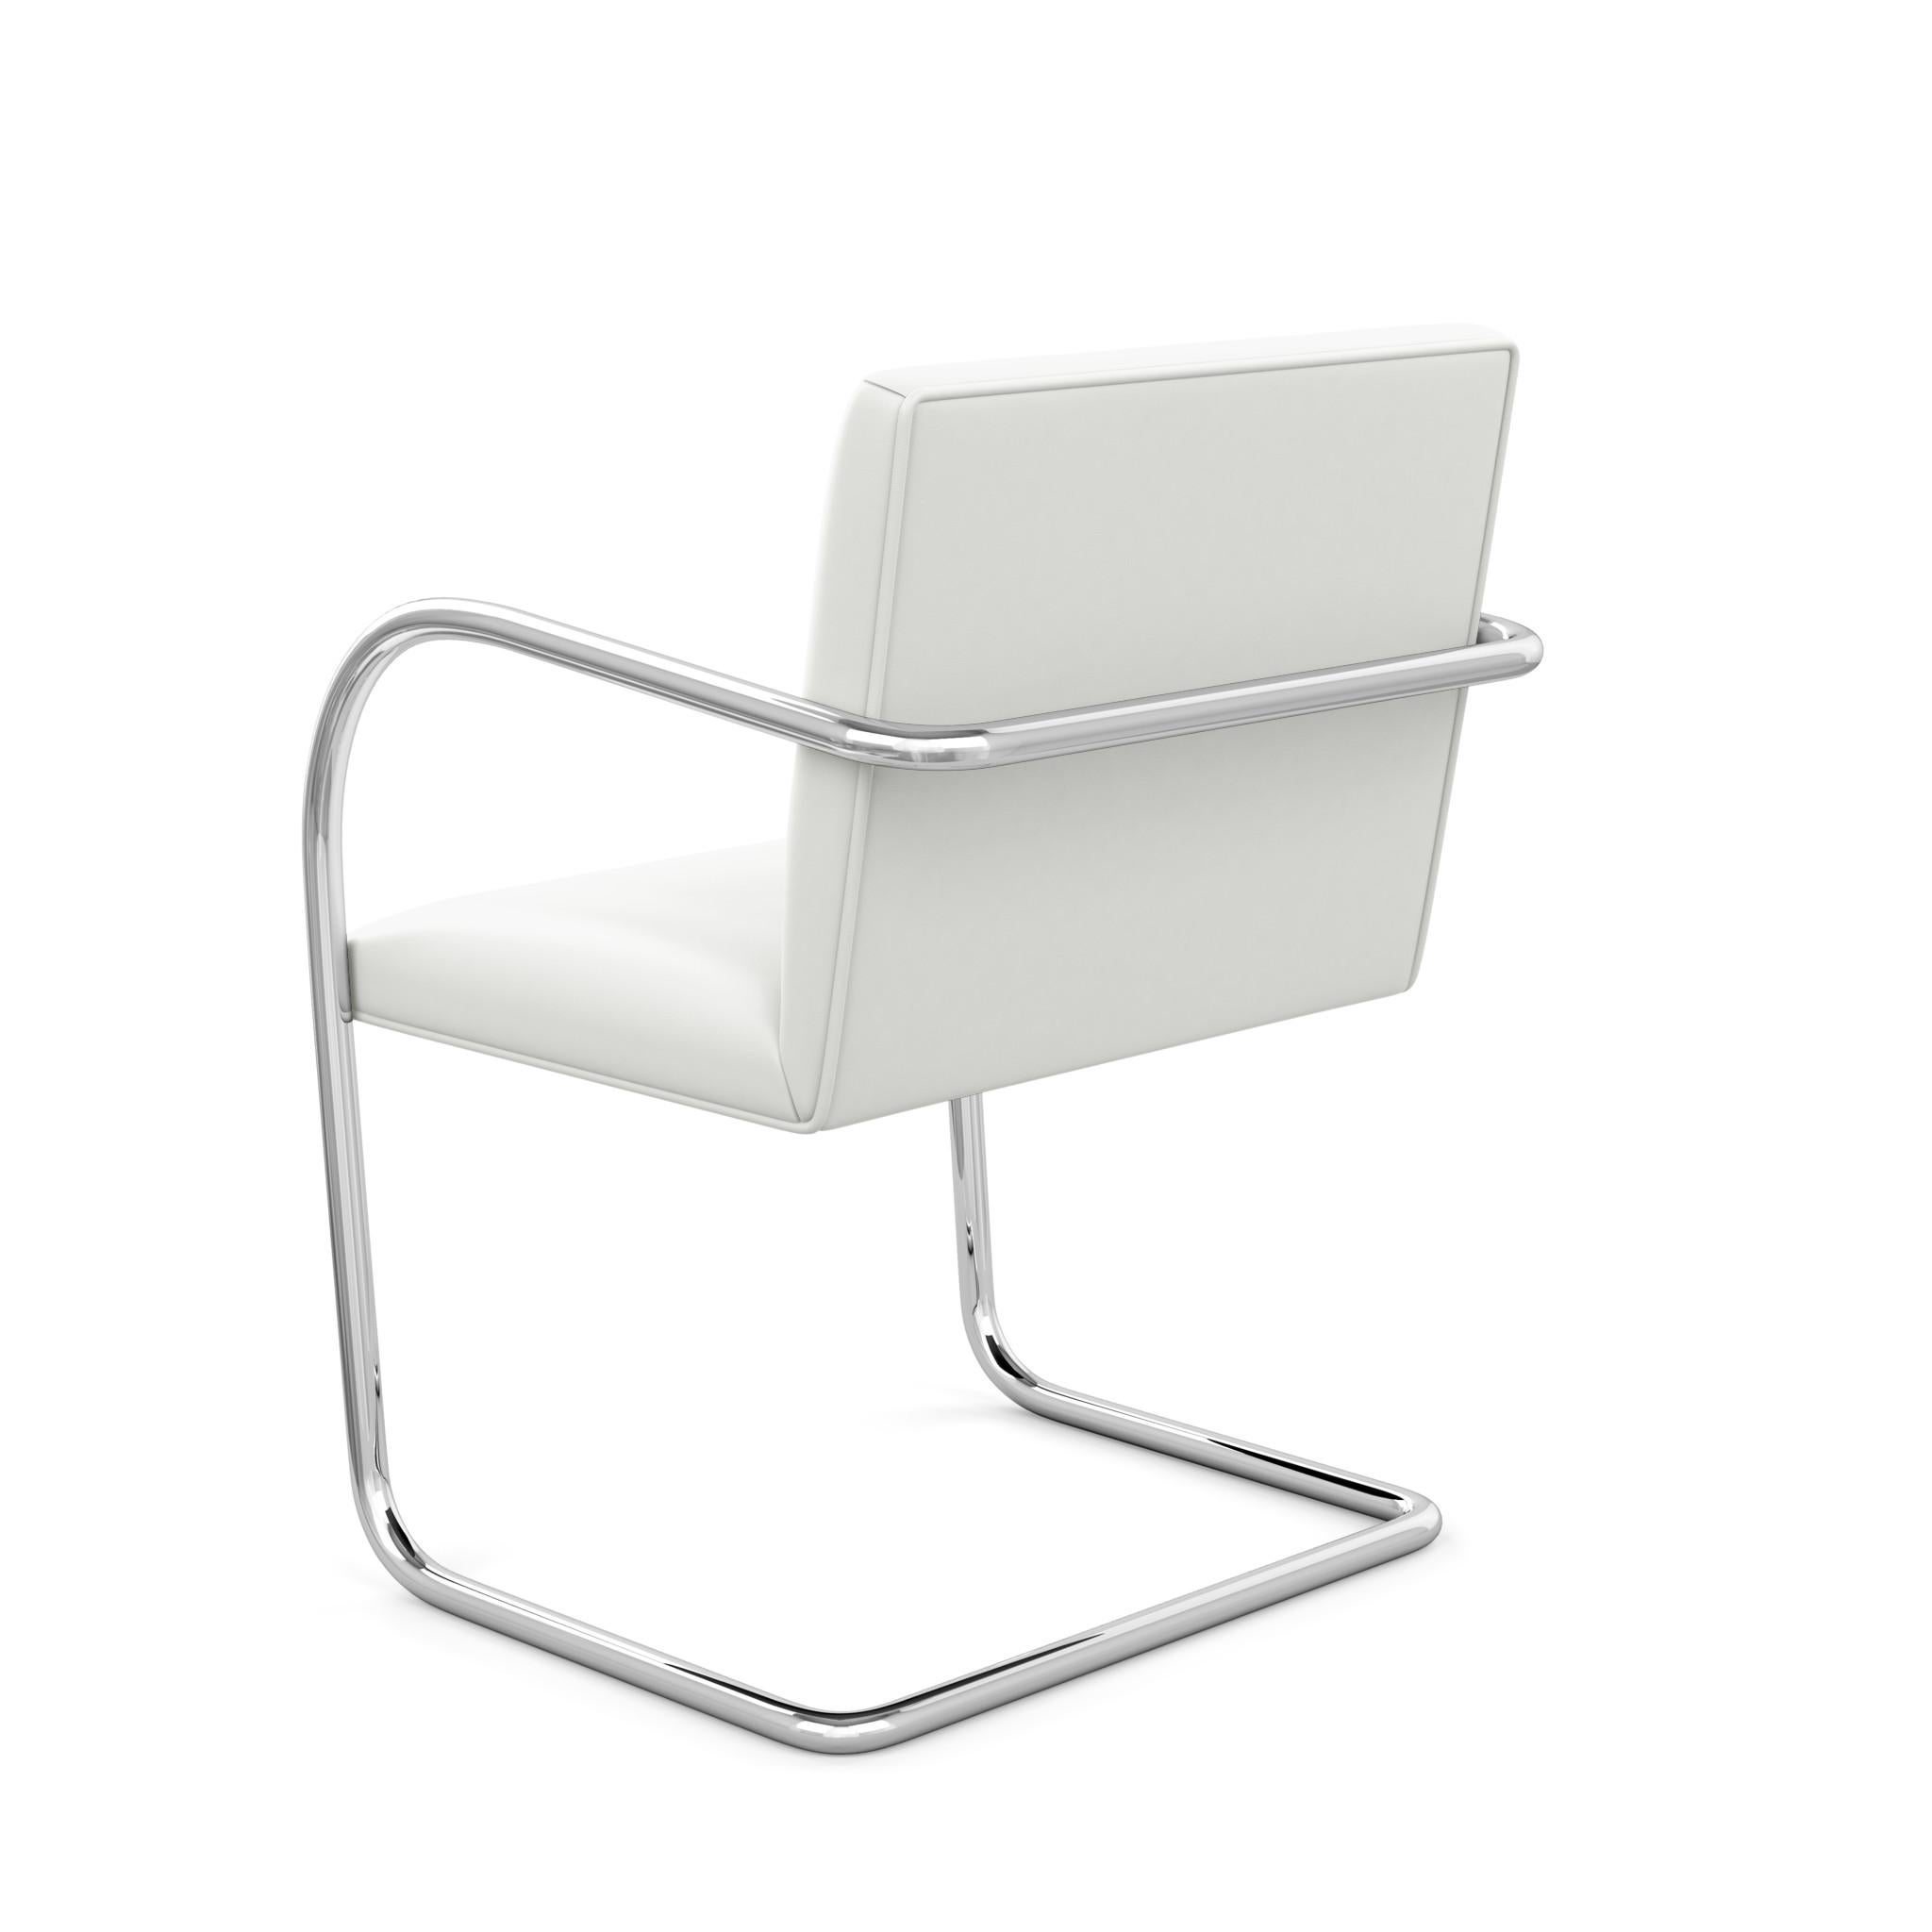 Designed by Mies van der Rohe for his renowned Tugendhat House in Brno, Czech Republic, the Brno Chair reflects the groundbreaking simplicity of its original environment. The design is celebrated for its lean profile, clean lines and meticulous